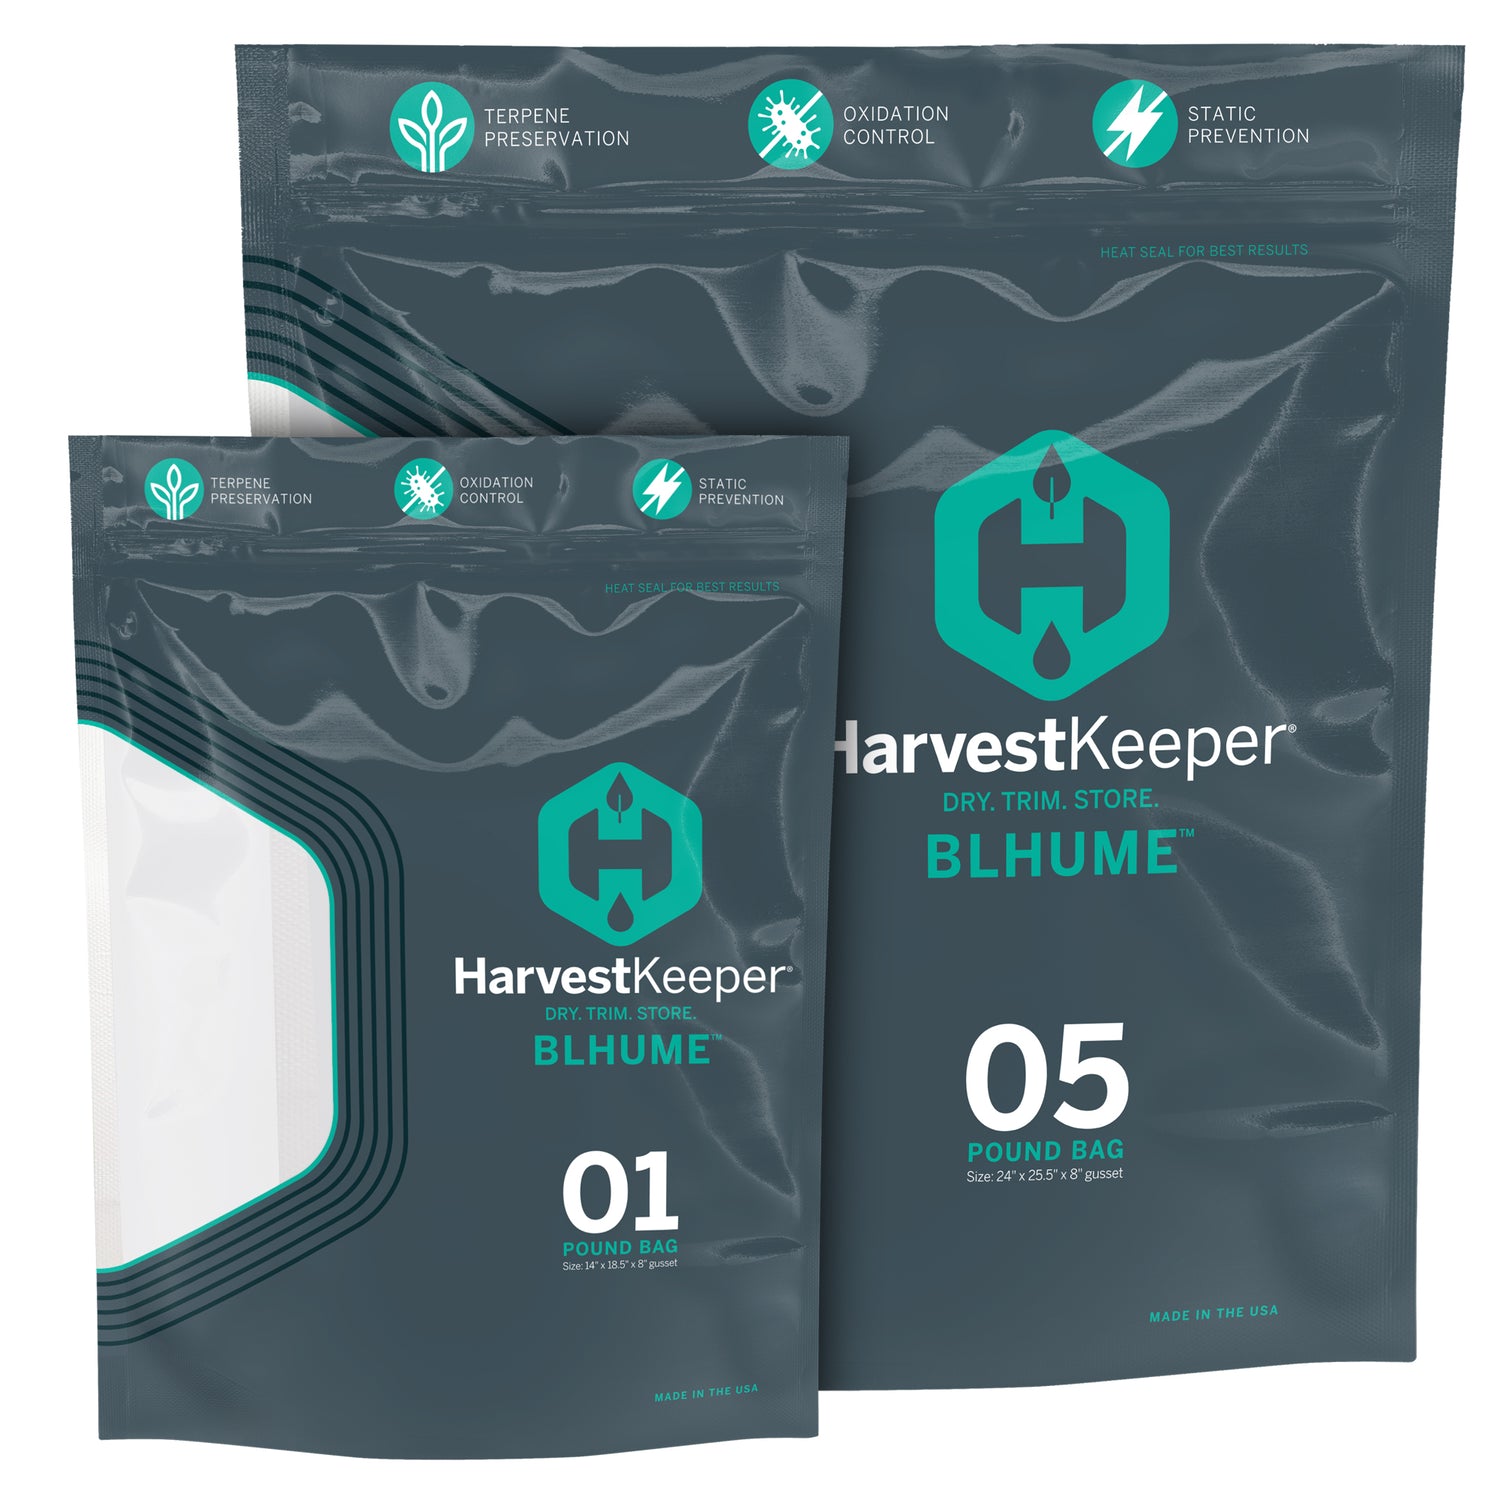 Harvest Keepe Blhume Bags - Long Term Storage Bags